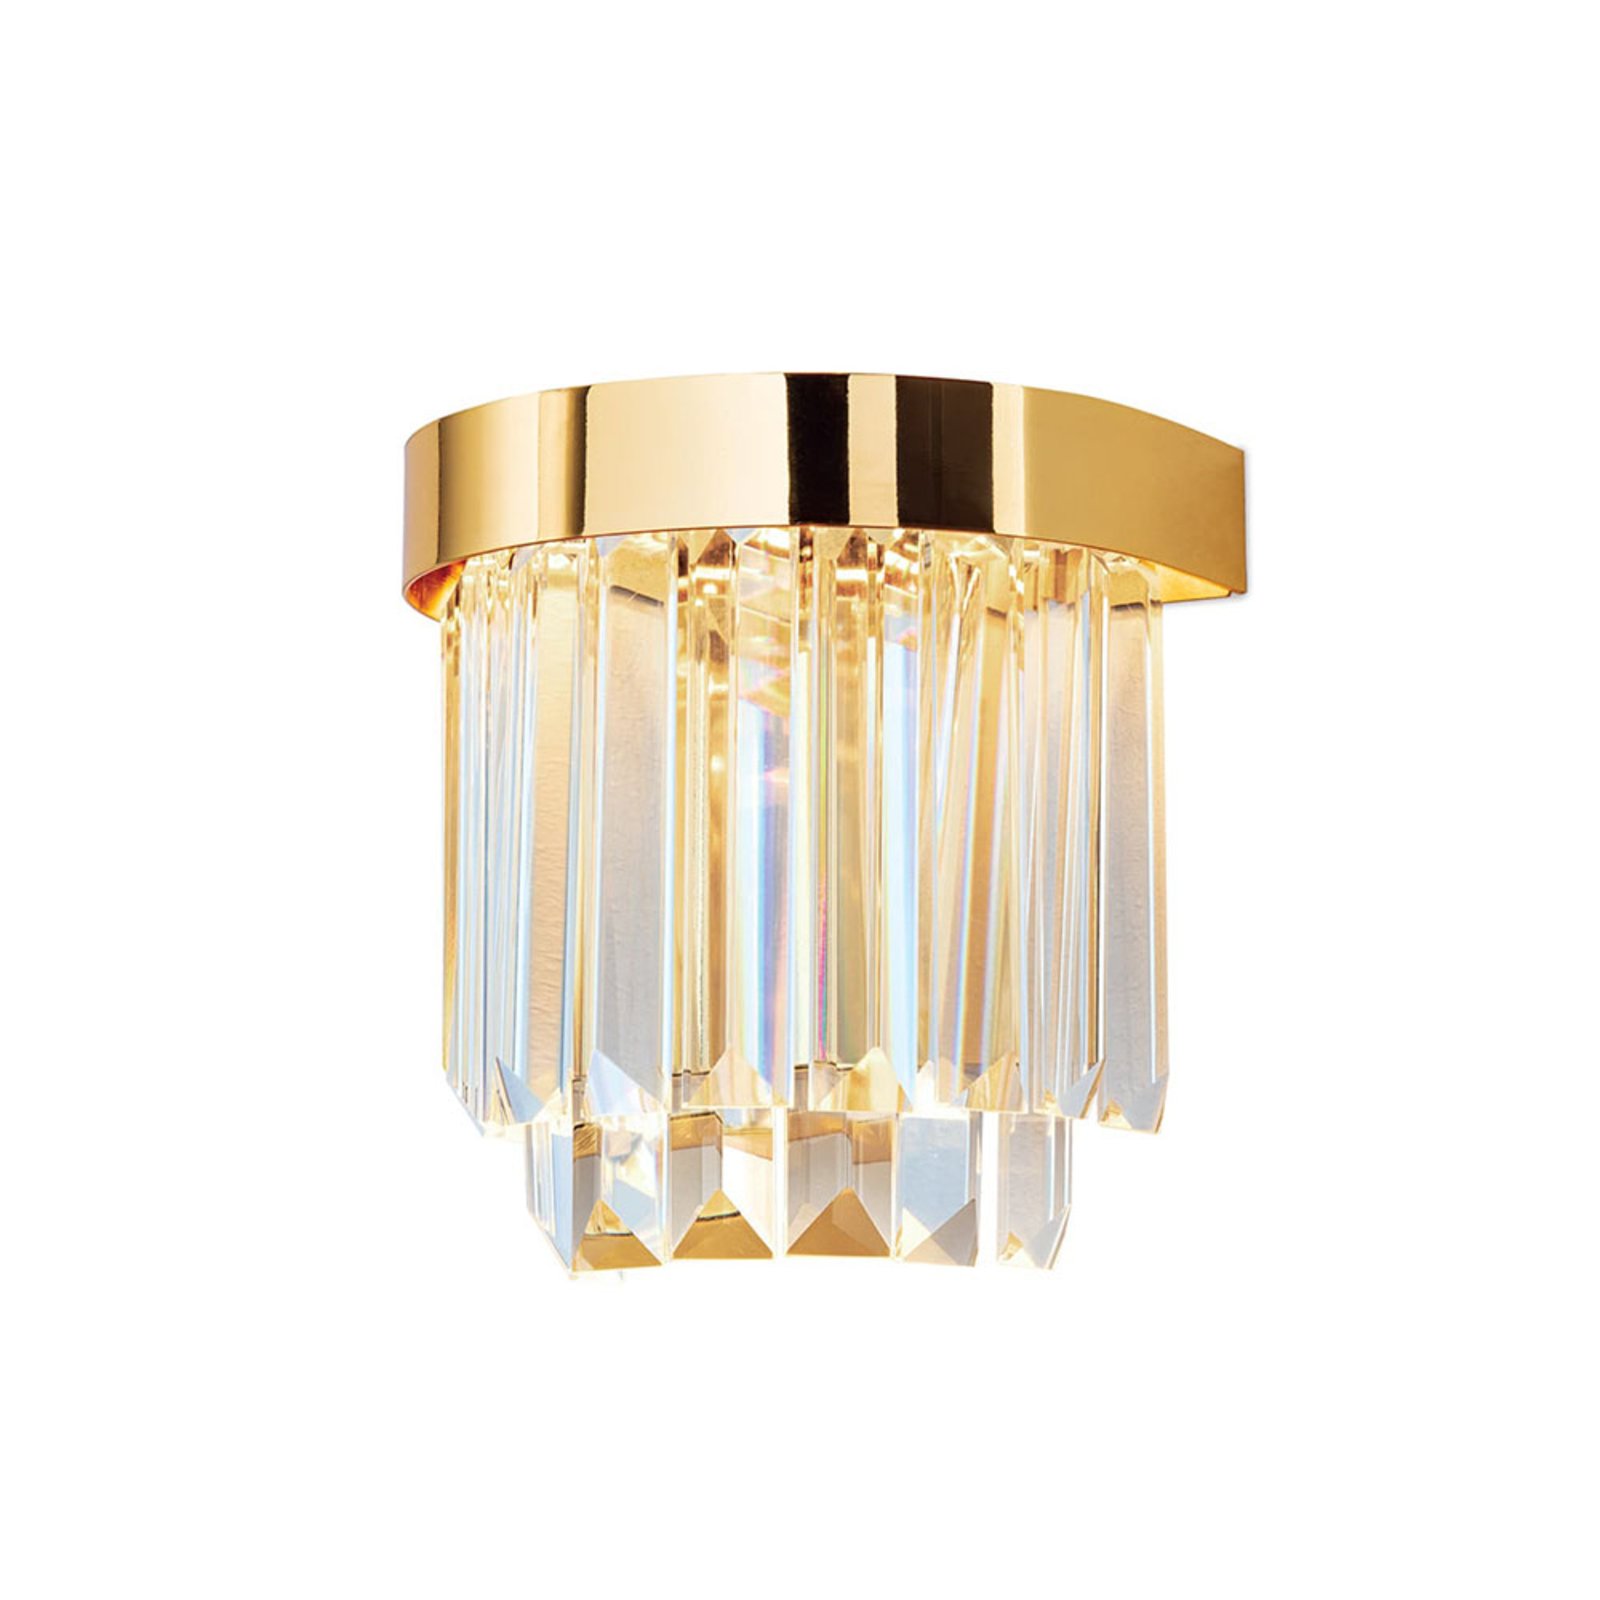 Prism LED wall light with up and downlight, gold